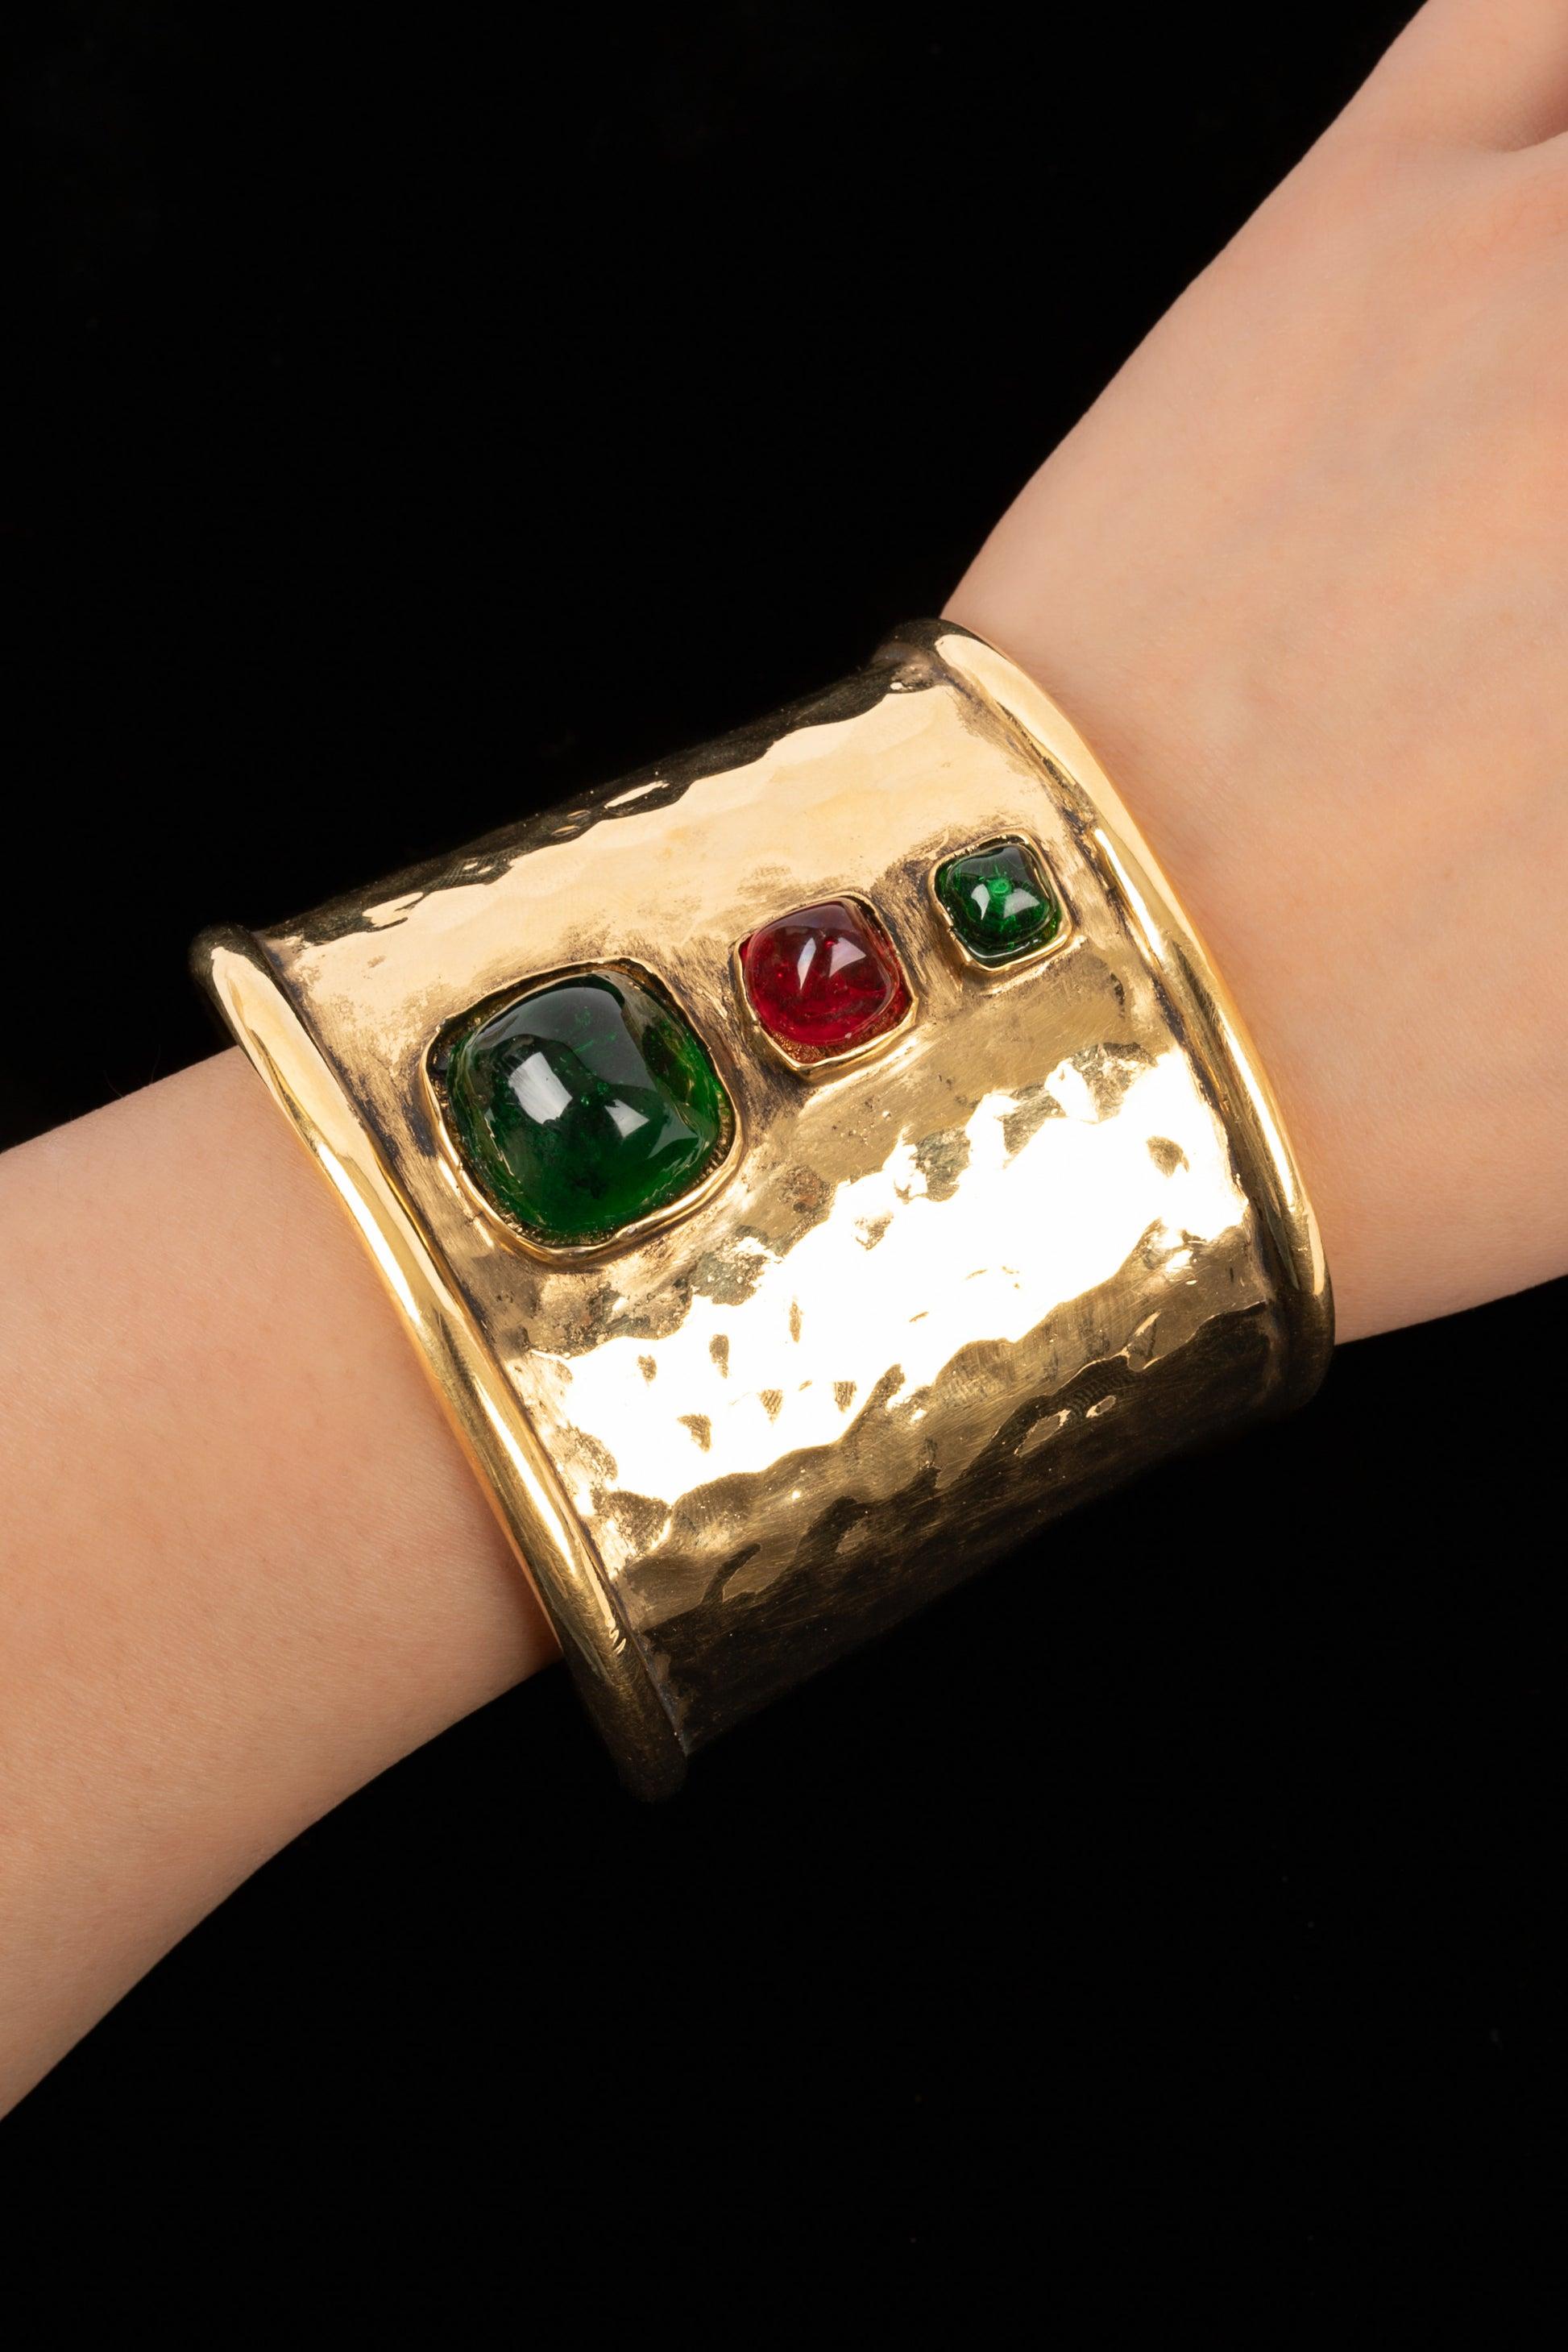 Chanel - (Made in France) Beaten golden metal cuff bracelet ornamented with three glass paste cabochons.

Additional information:
Condition: Very good condition
Dimensions: Height: 5.5 cm - Smaller circumference: 13.5 cm + opening: 3 cm

Seller